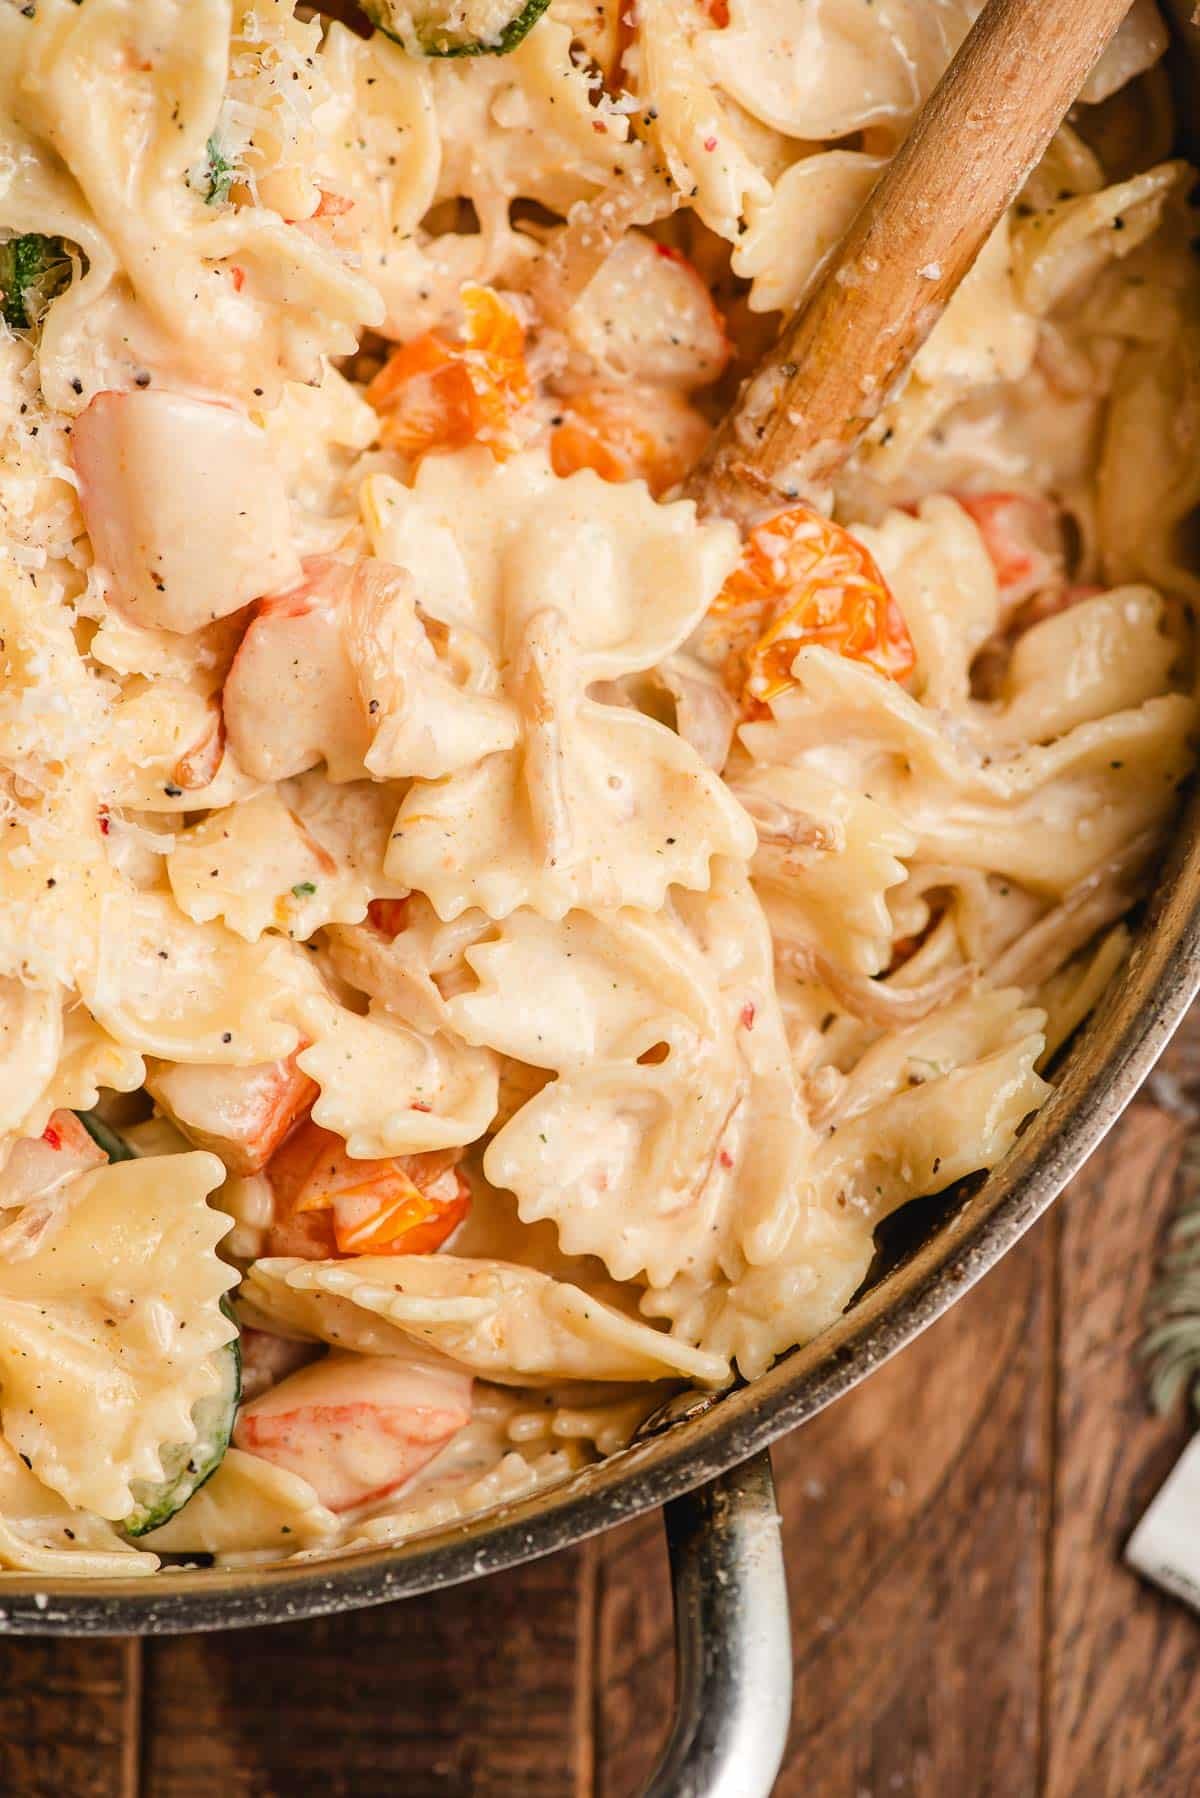 Bowtie pasta with cherry tomatoes and imitation crab in a skillet.